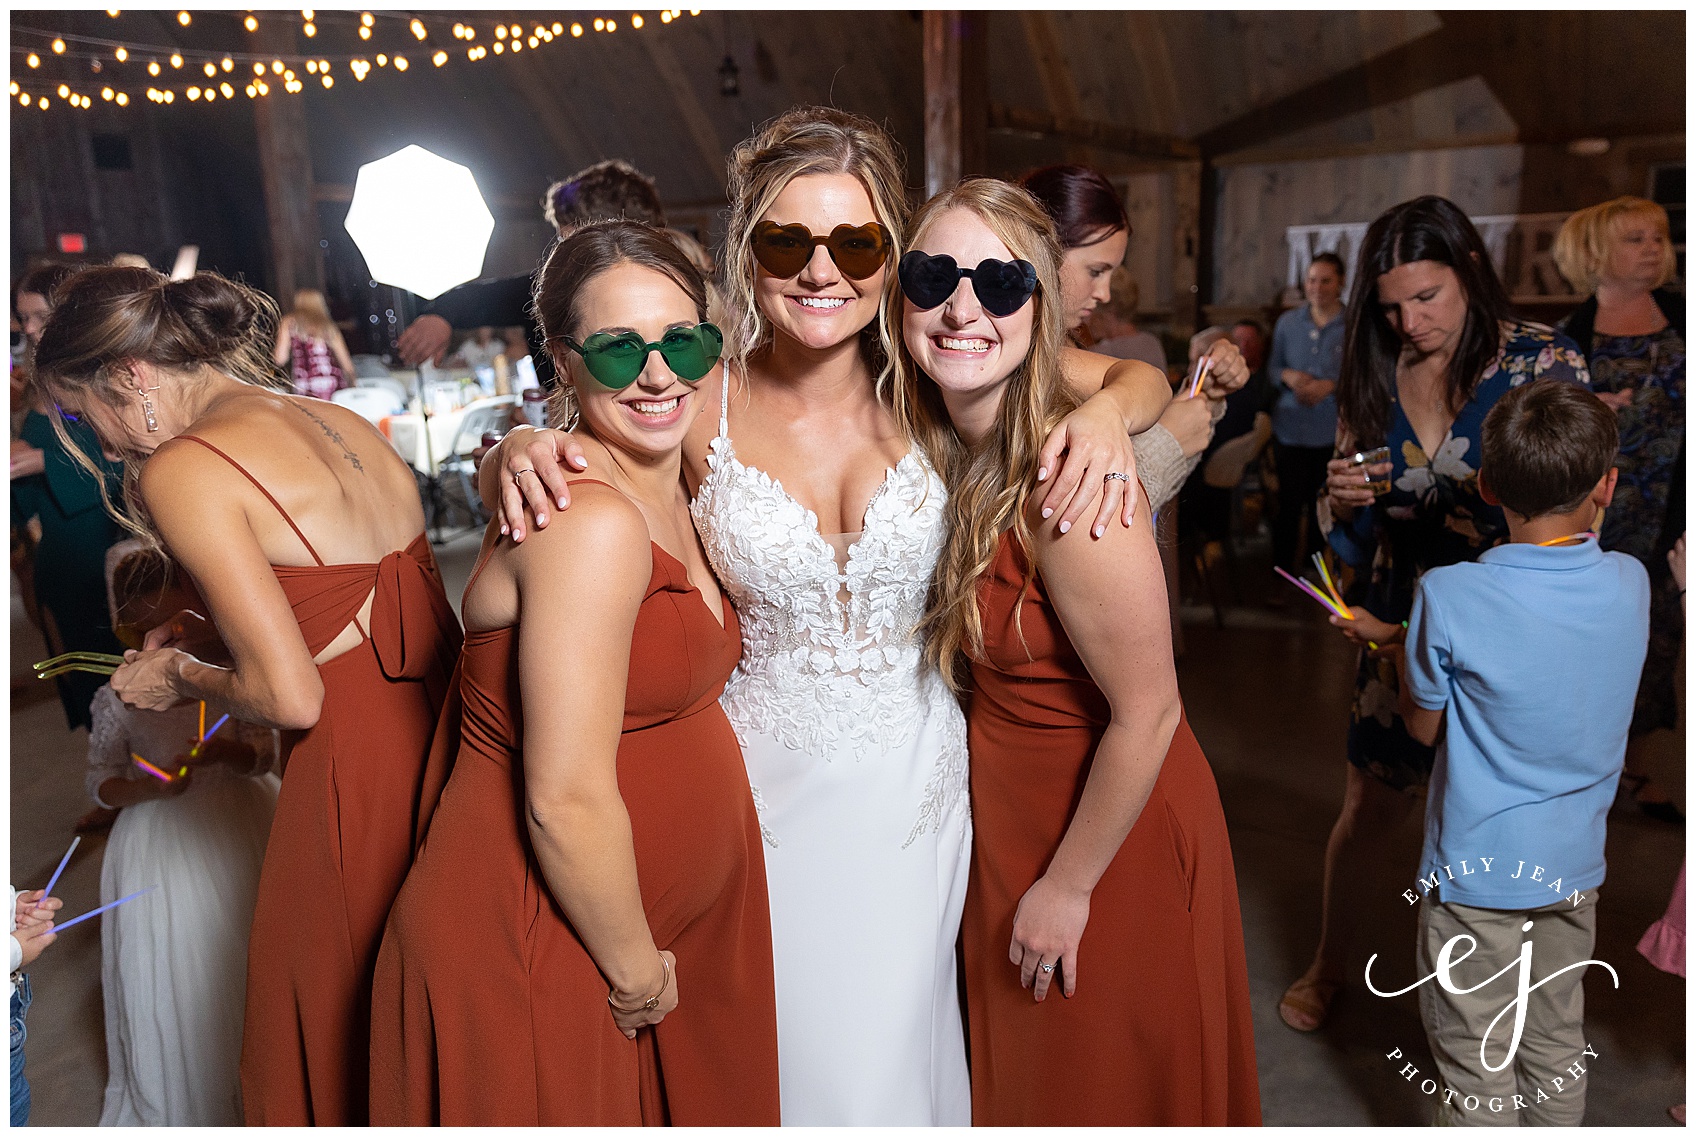 party dancing with fun sunglasses at pedretti party barn